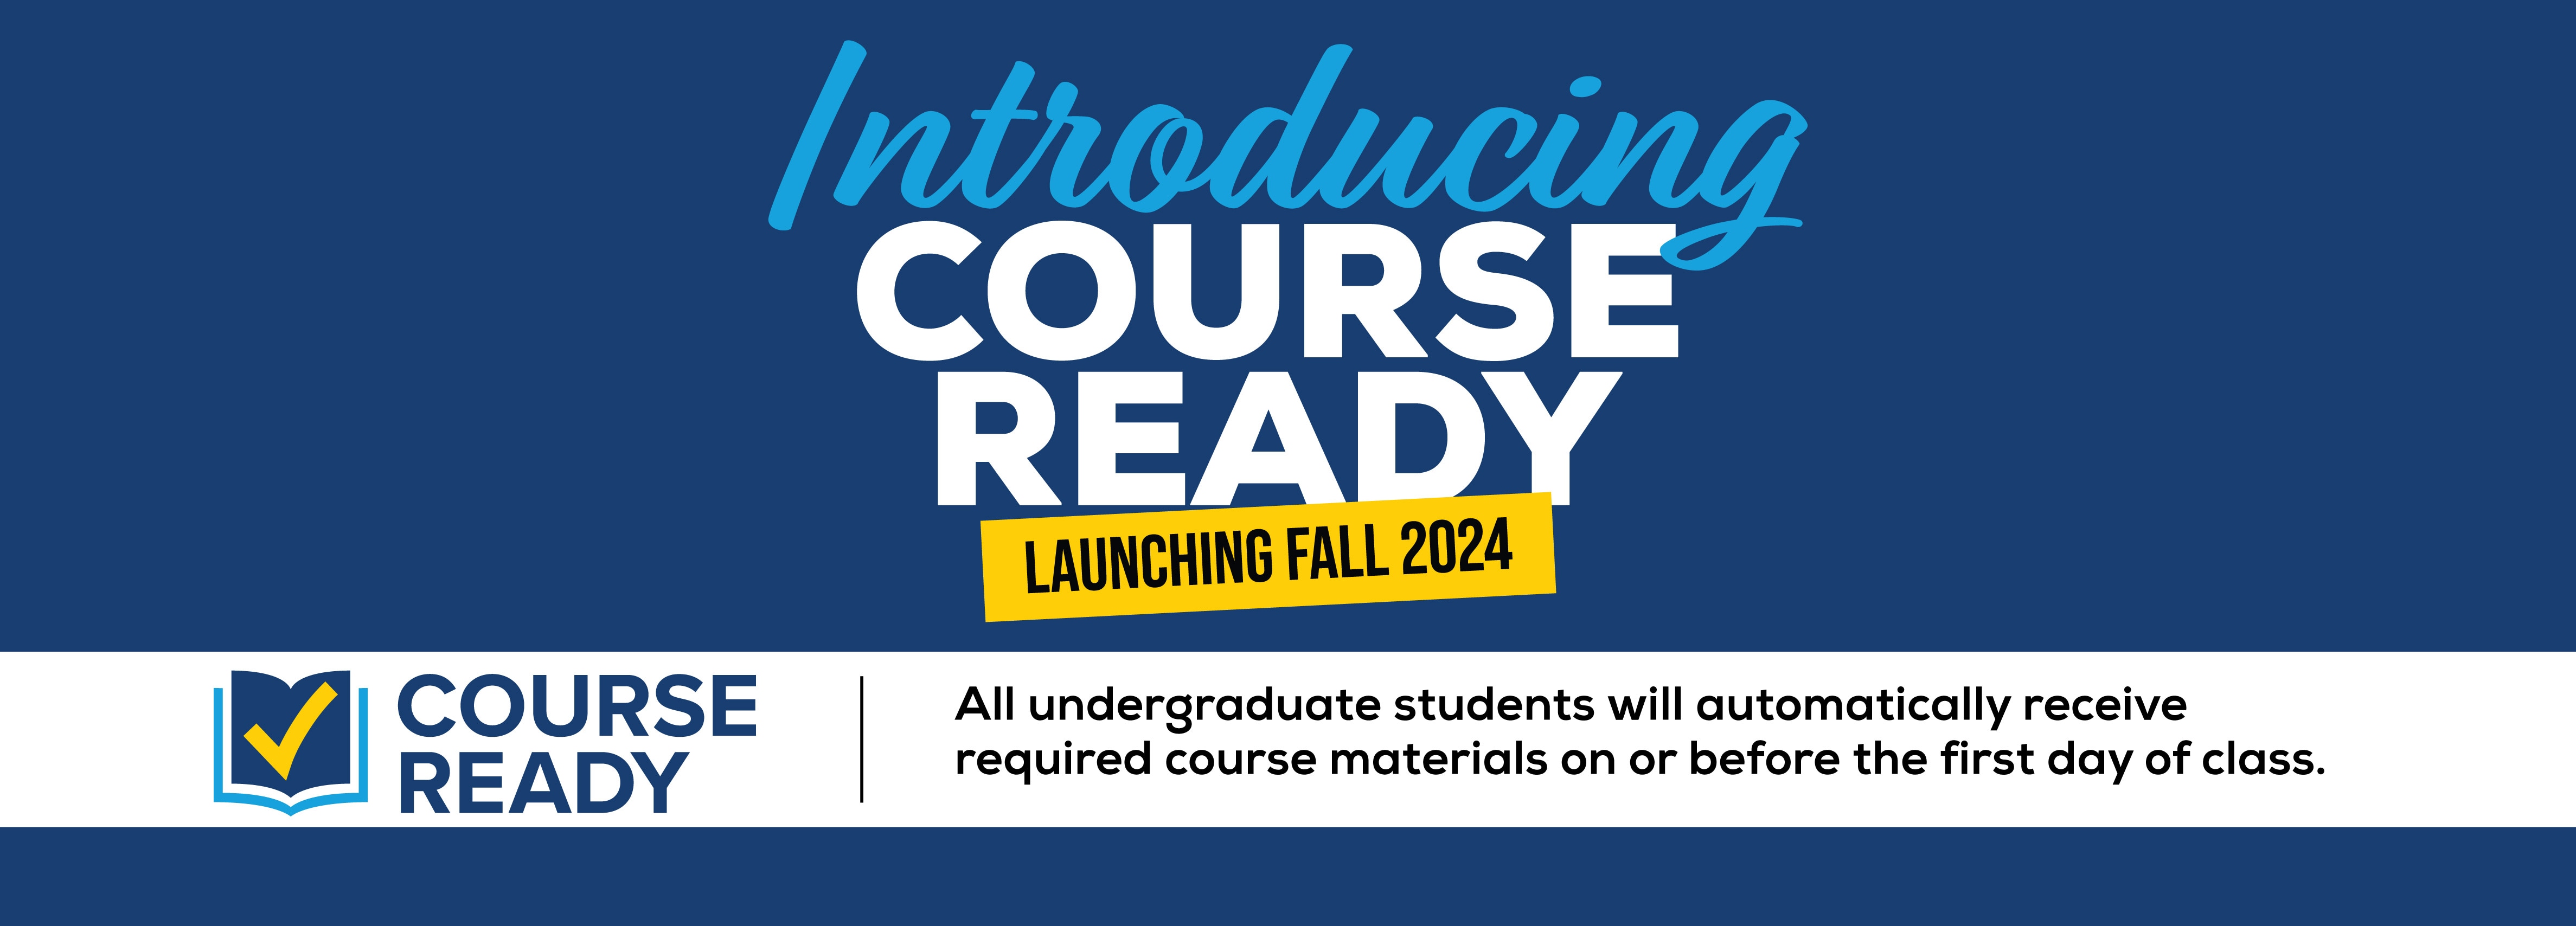 Introducing Course Ready Launching Fall 2024 - All undergraduate students will automatically receive required course materials on or before the first day of class. (new tab)